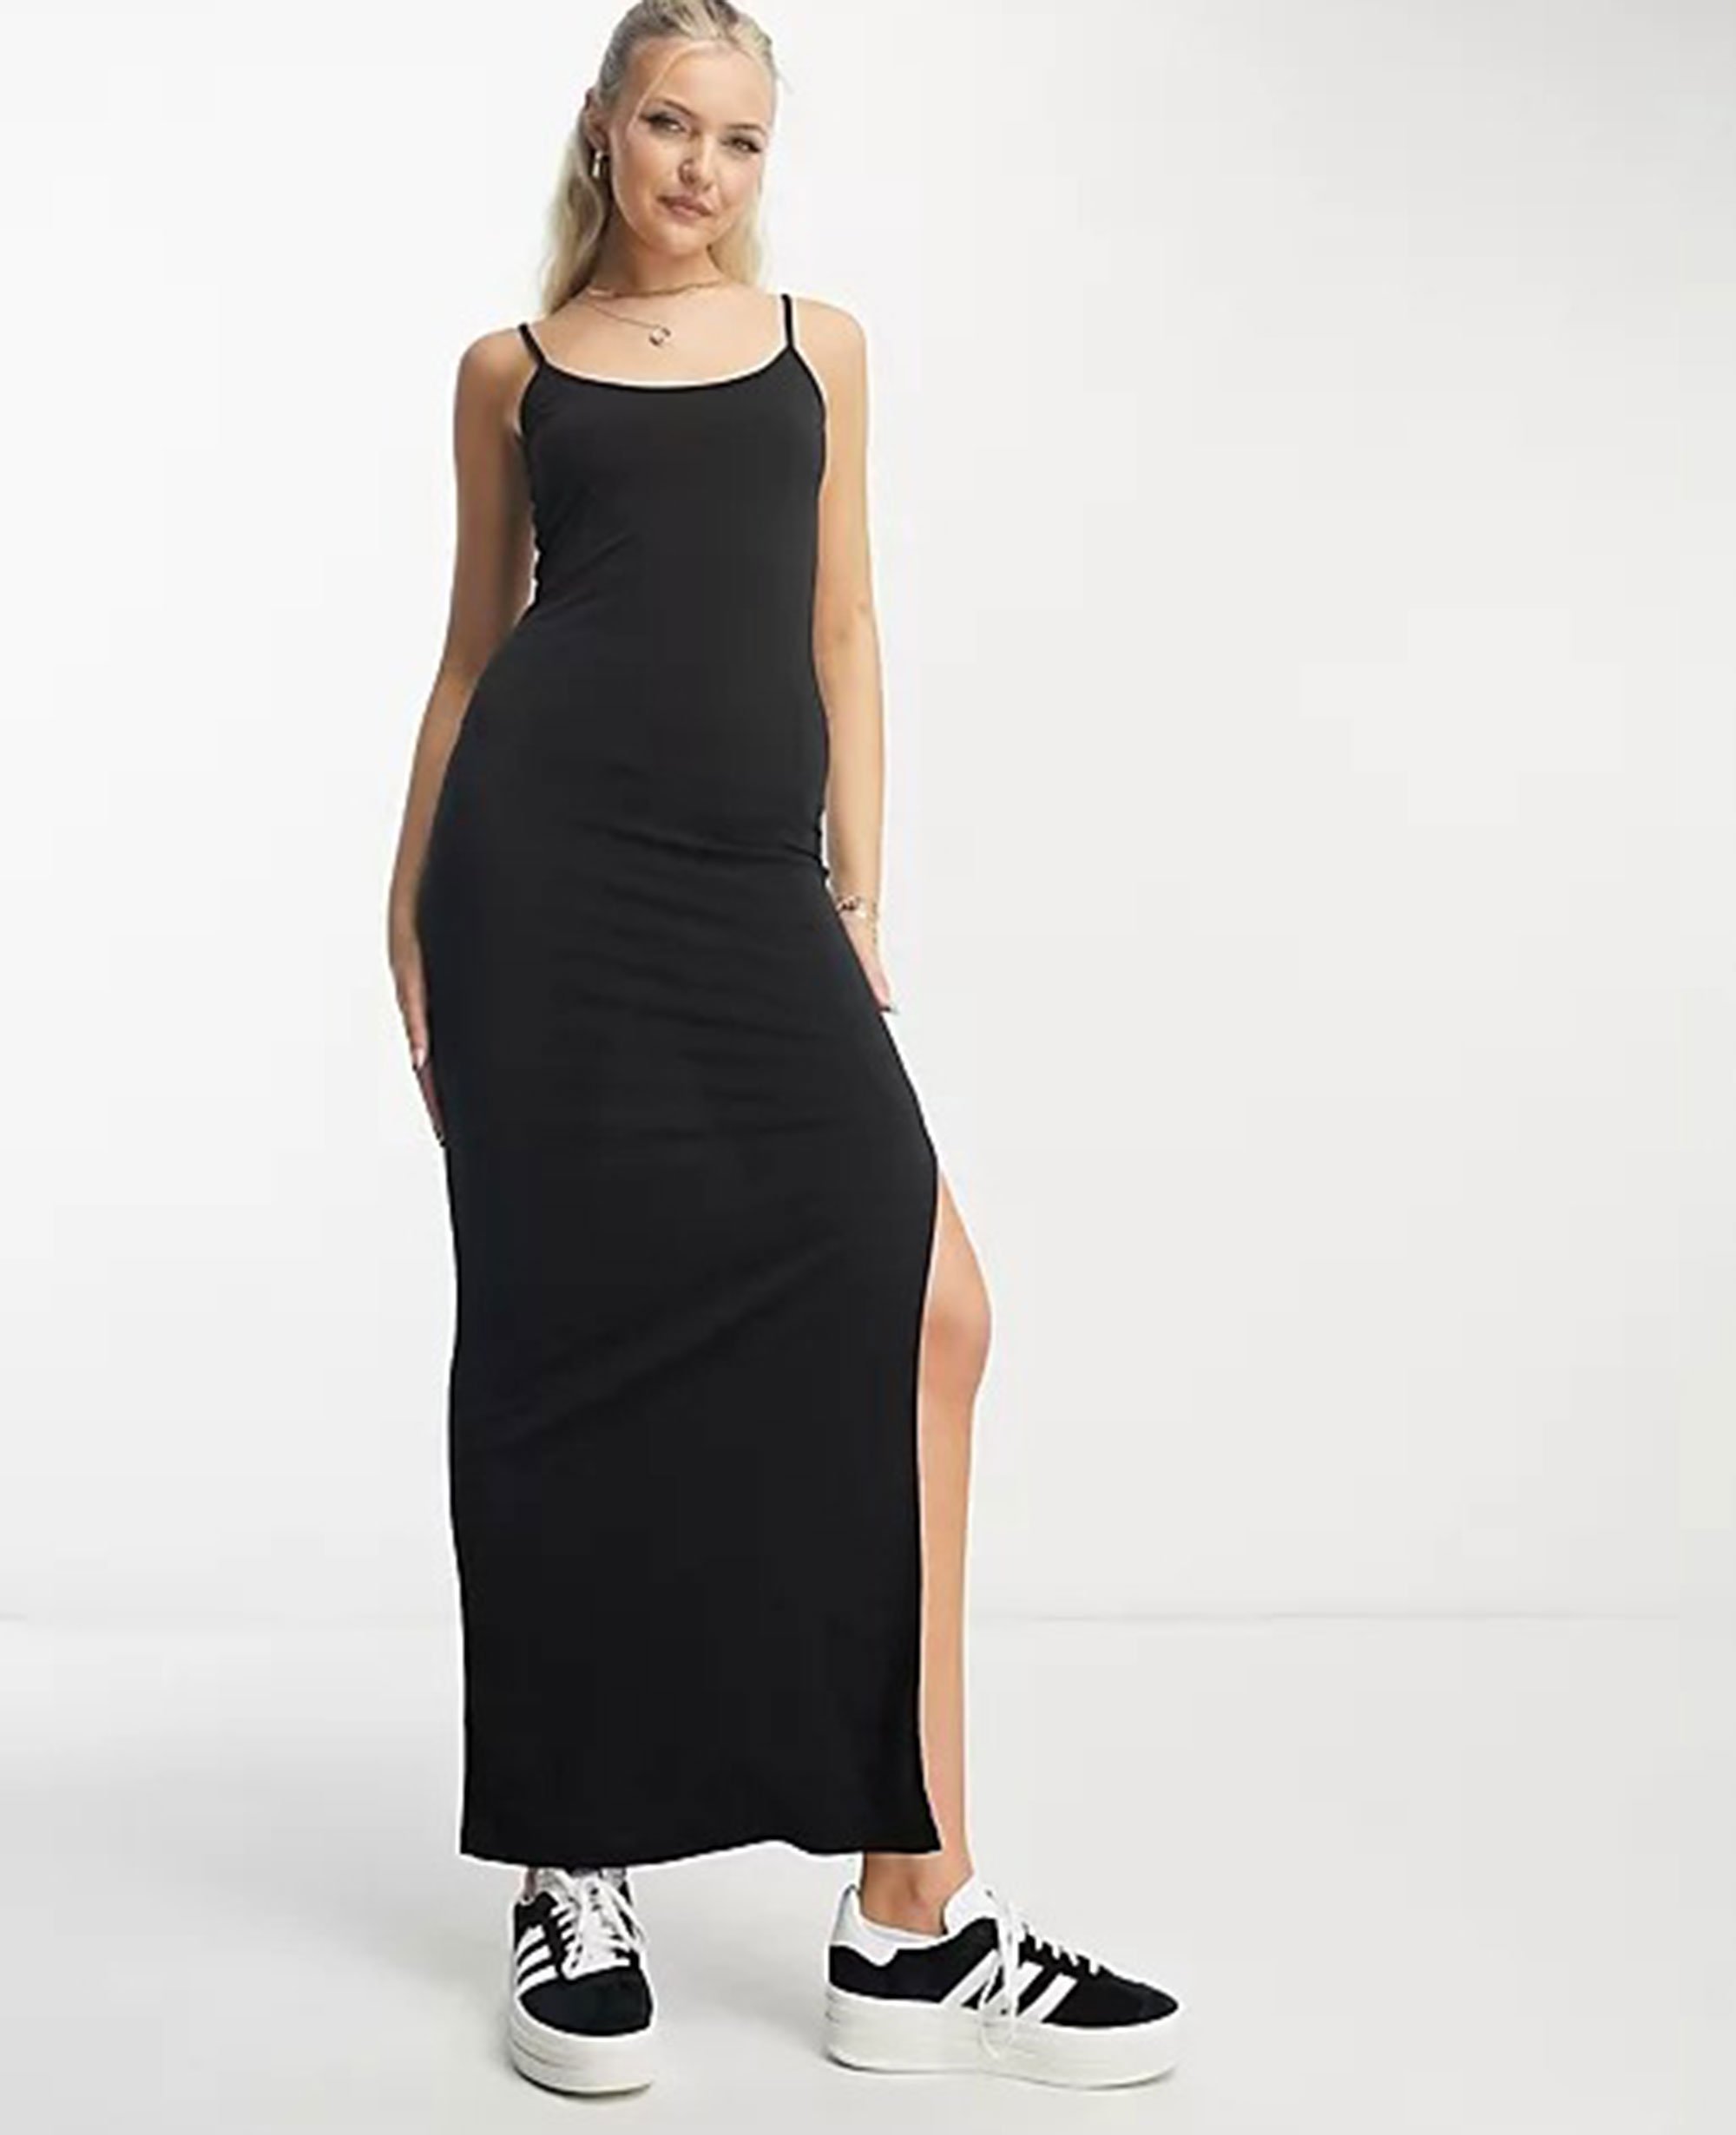 This is the best affordable dupe for the long skims slip dress, its a